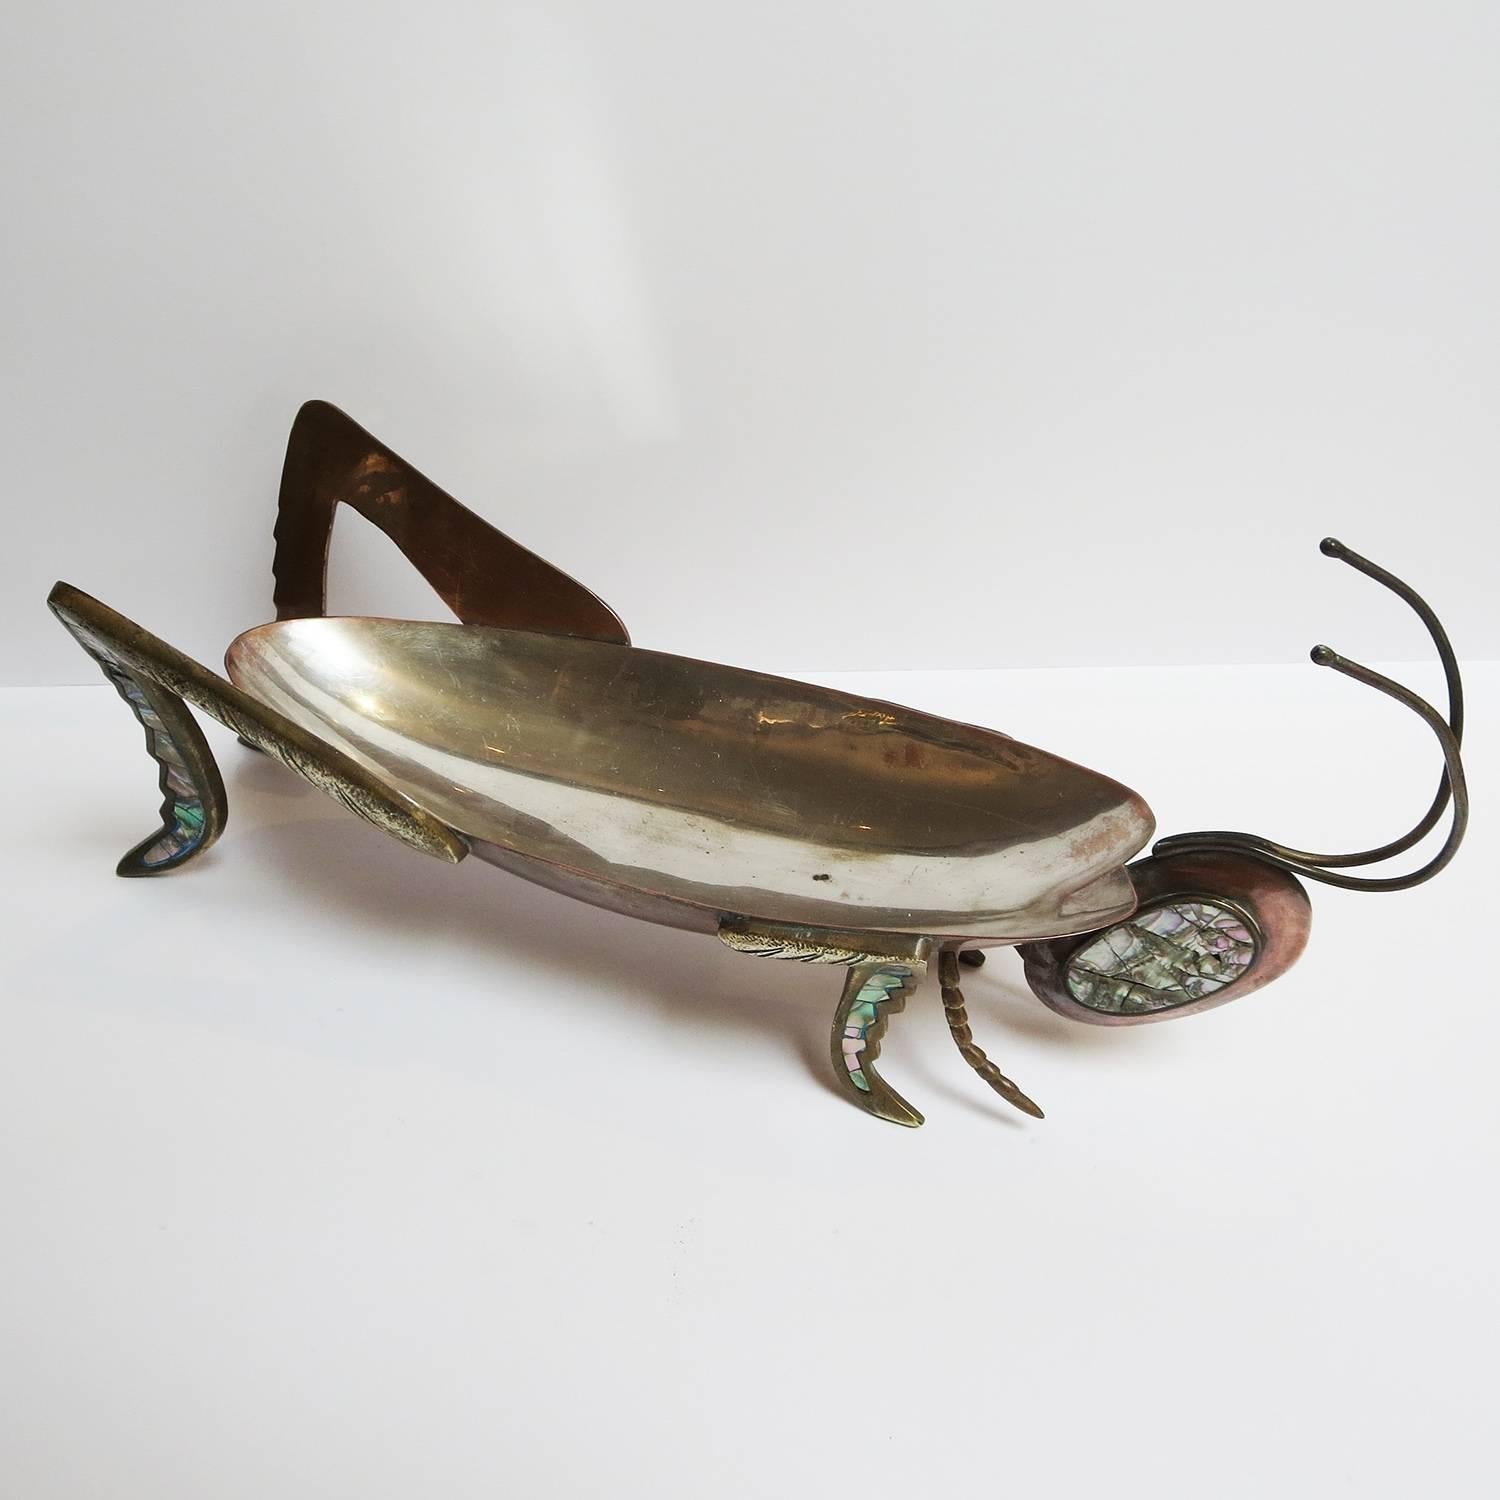 A lovely decorative bowl for candies or any small items. The body is made from copper, with a silver plated centre lining. The legs are solid brass, with abalone inlay. The head is made of copper, with abalone inlay. The bowl is marked Cobre